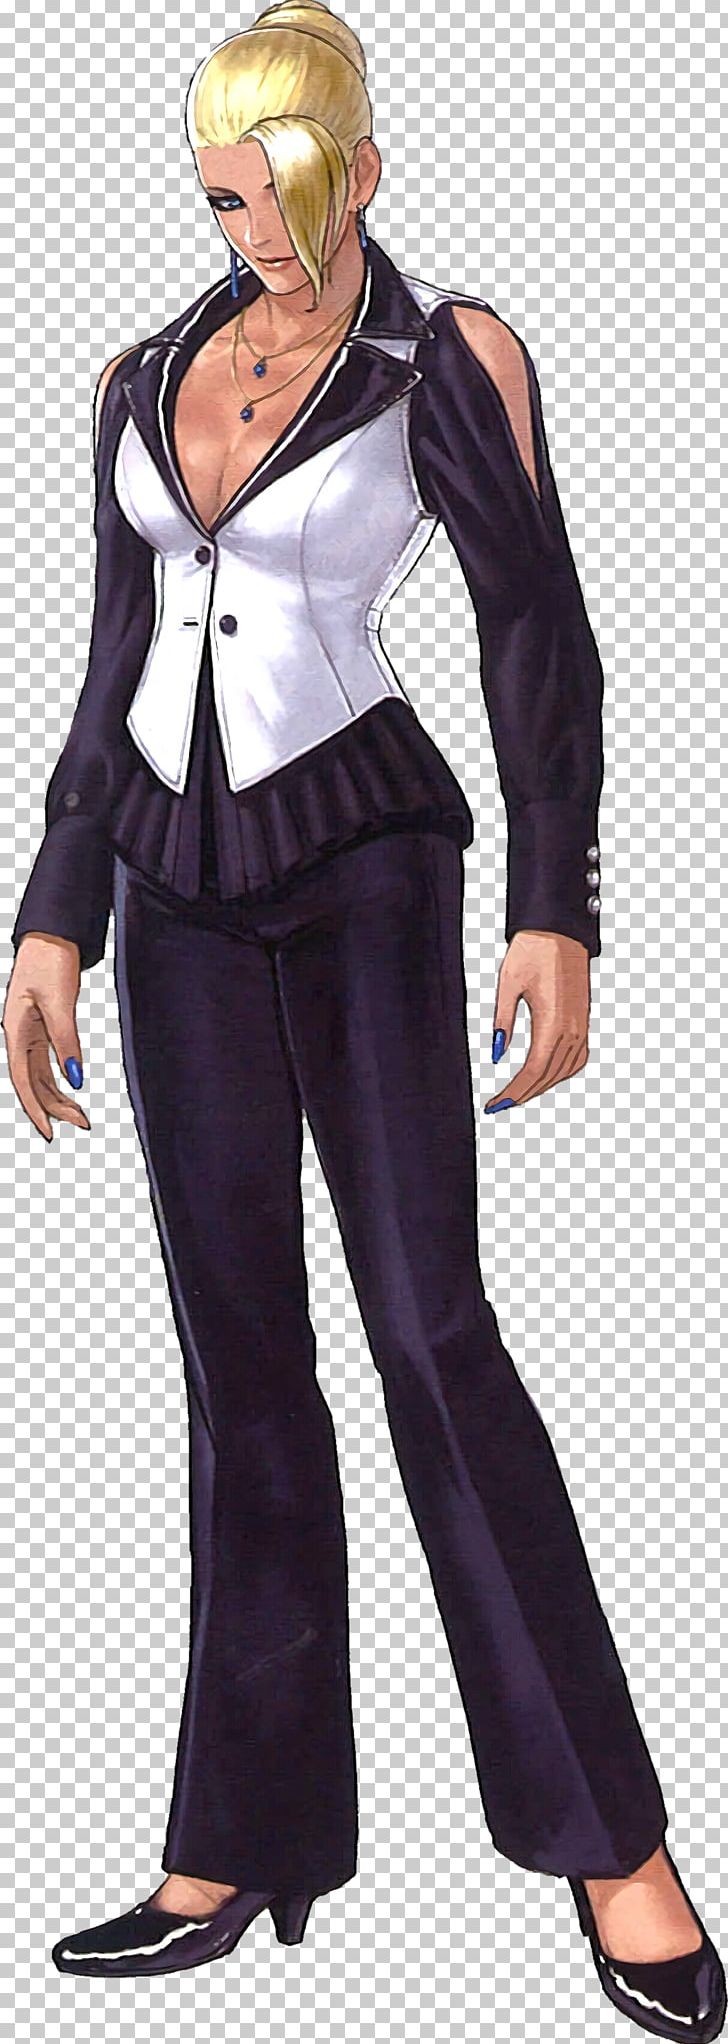 The King Of Fighters XIV The King Of Fighters '96 Vice The King Of Fighters '98 Iori Yagami PNG, Clipart, Anime, Costume, Costume Design, Fictional Character, Figurine Free PNG Download